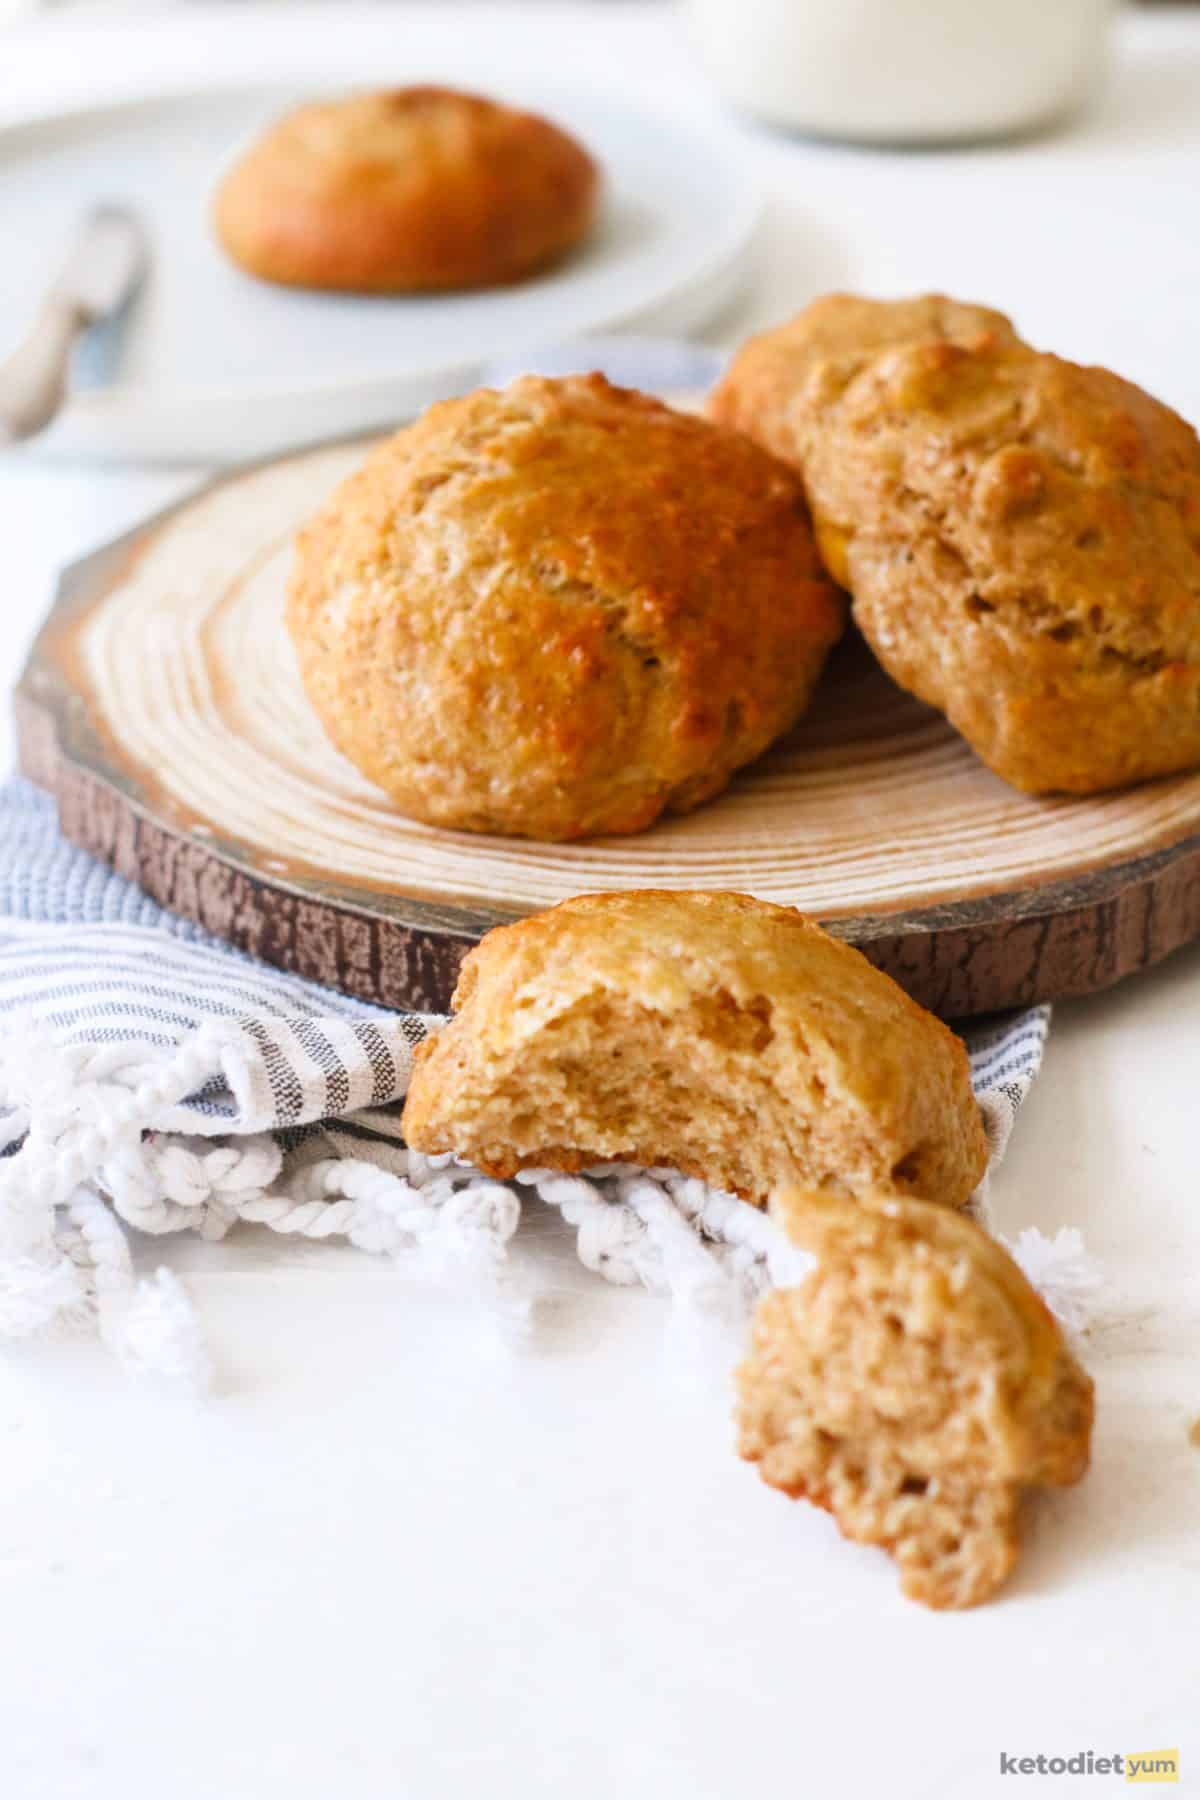 Delicious fresh keto bread rolls with a light and fluffy texture